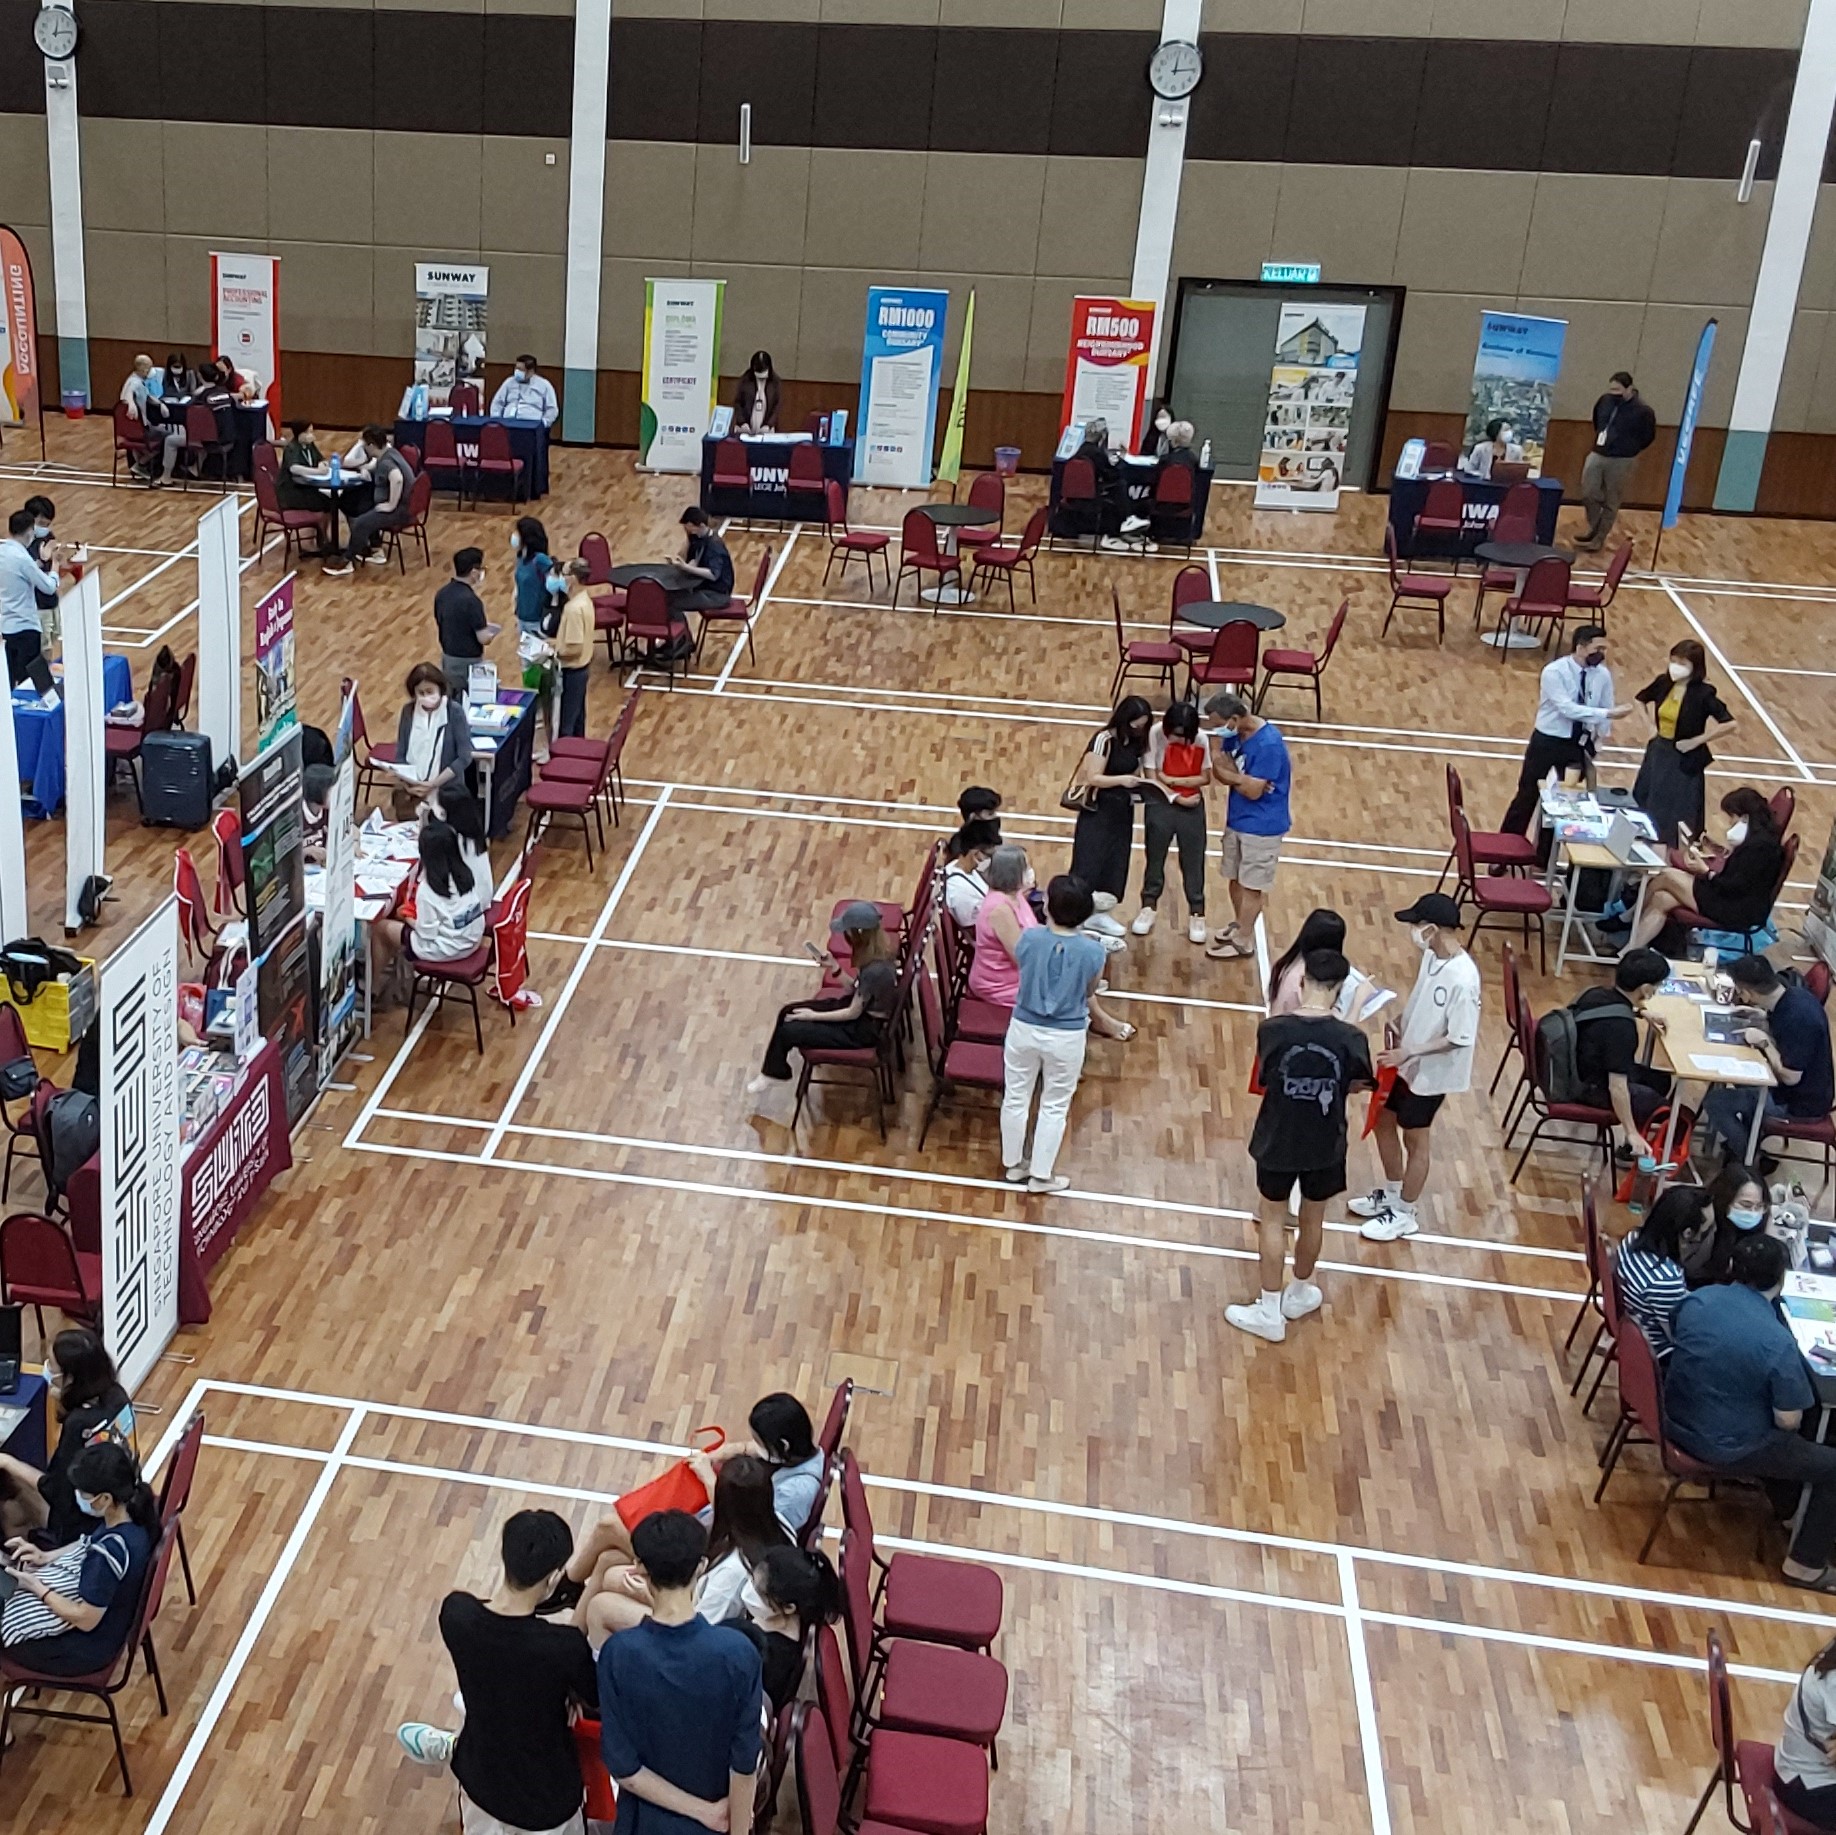 The University Showcase featured institutions from Singapore, Hong Kong, Japan, Australia, UK as well as Sunway University.